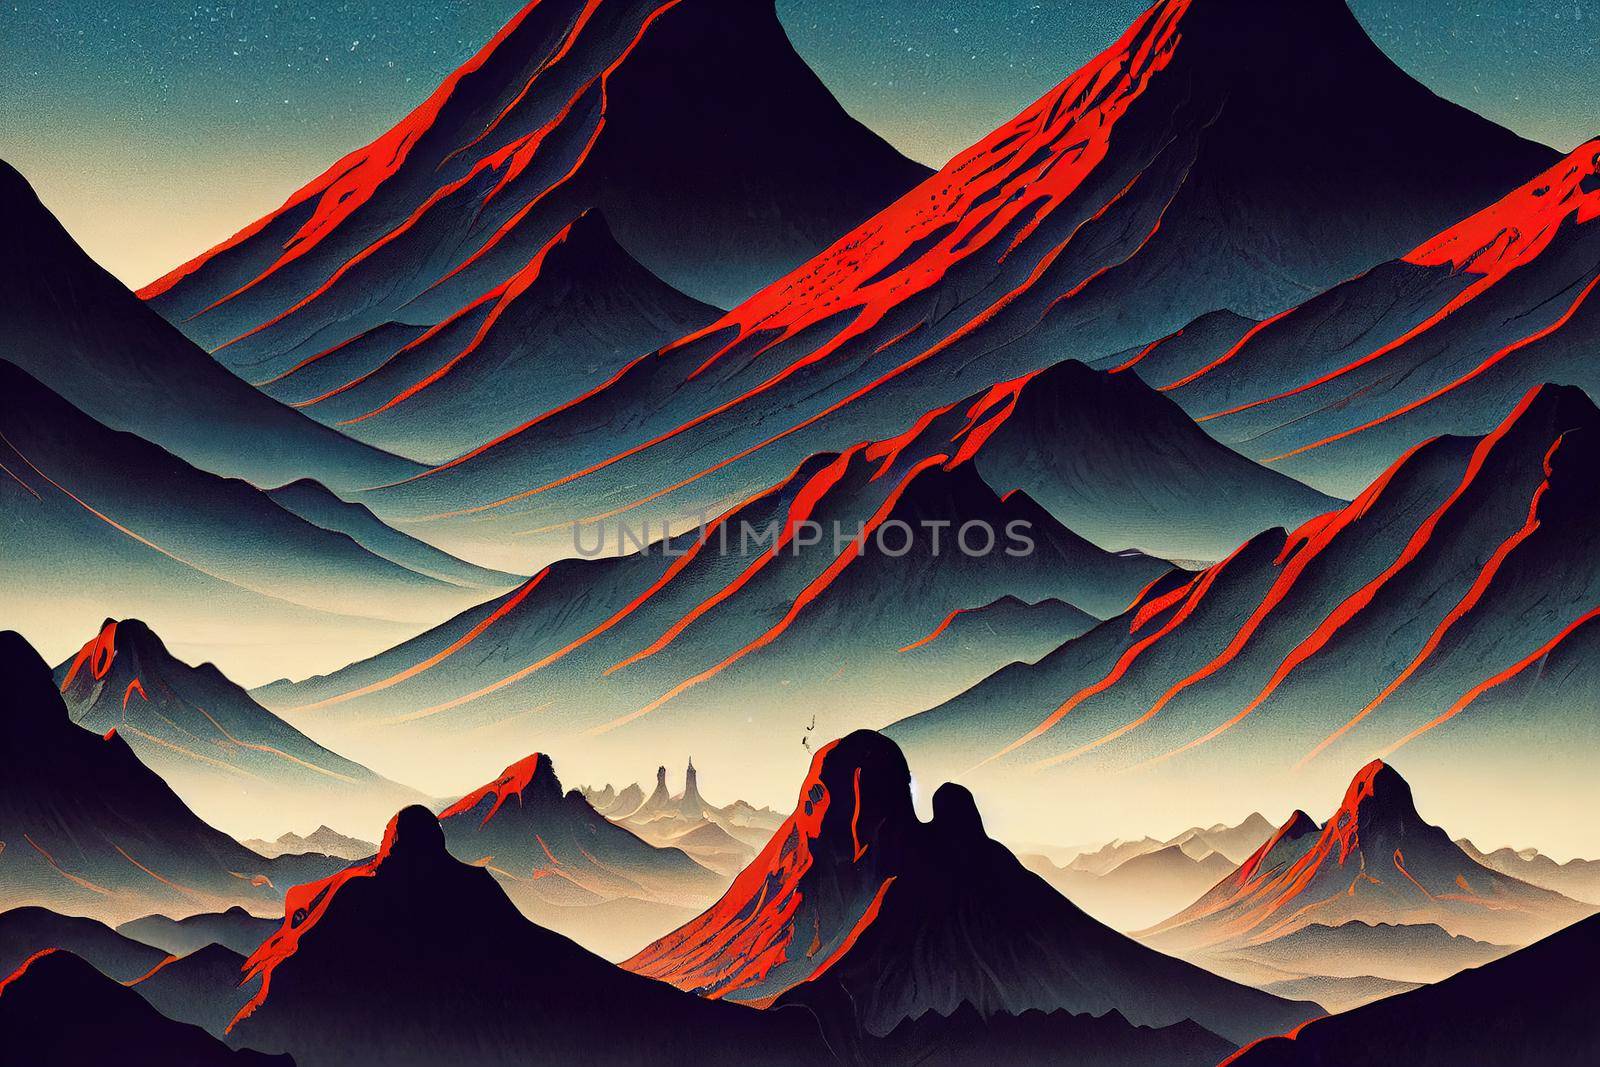 Toon style digital illustration of Mountains. High quality 3d illustration